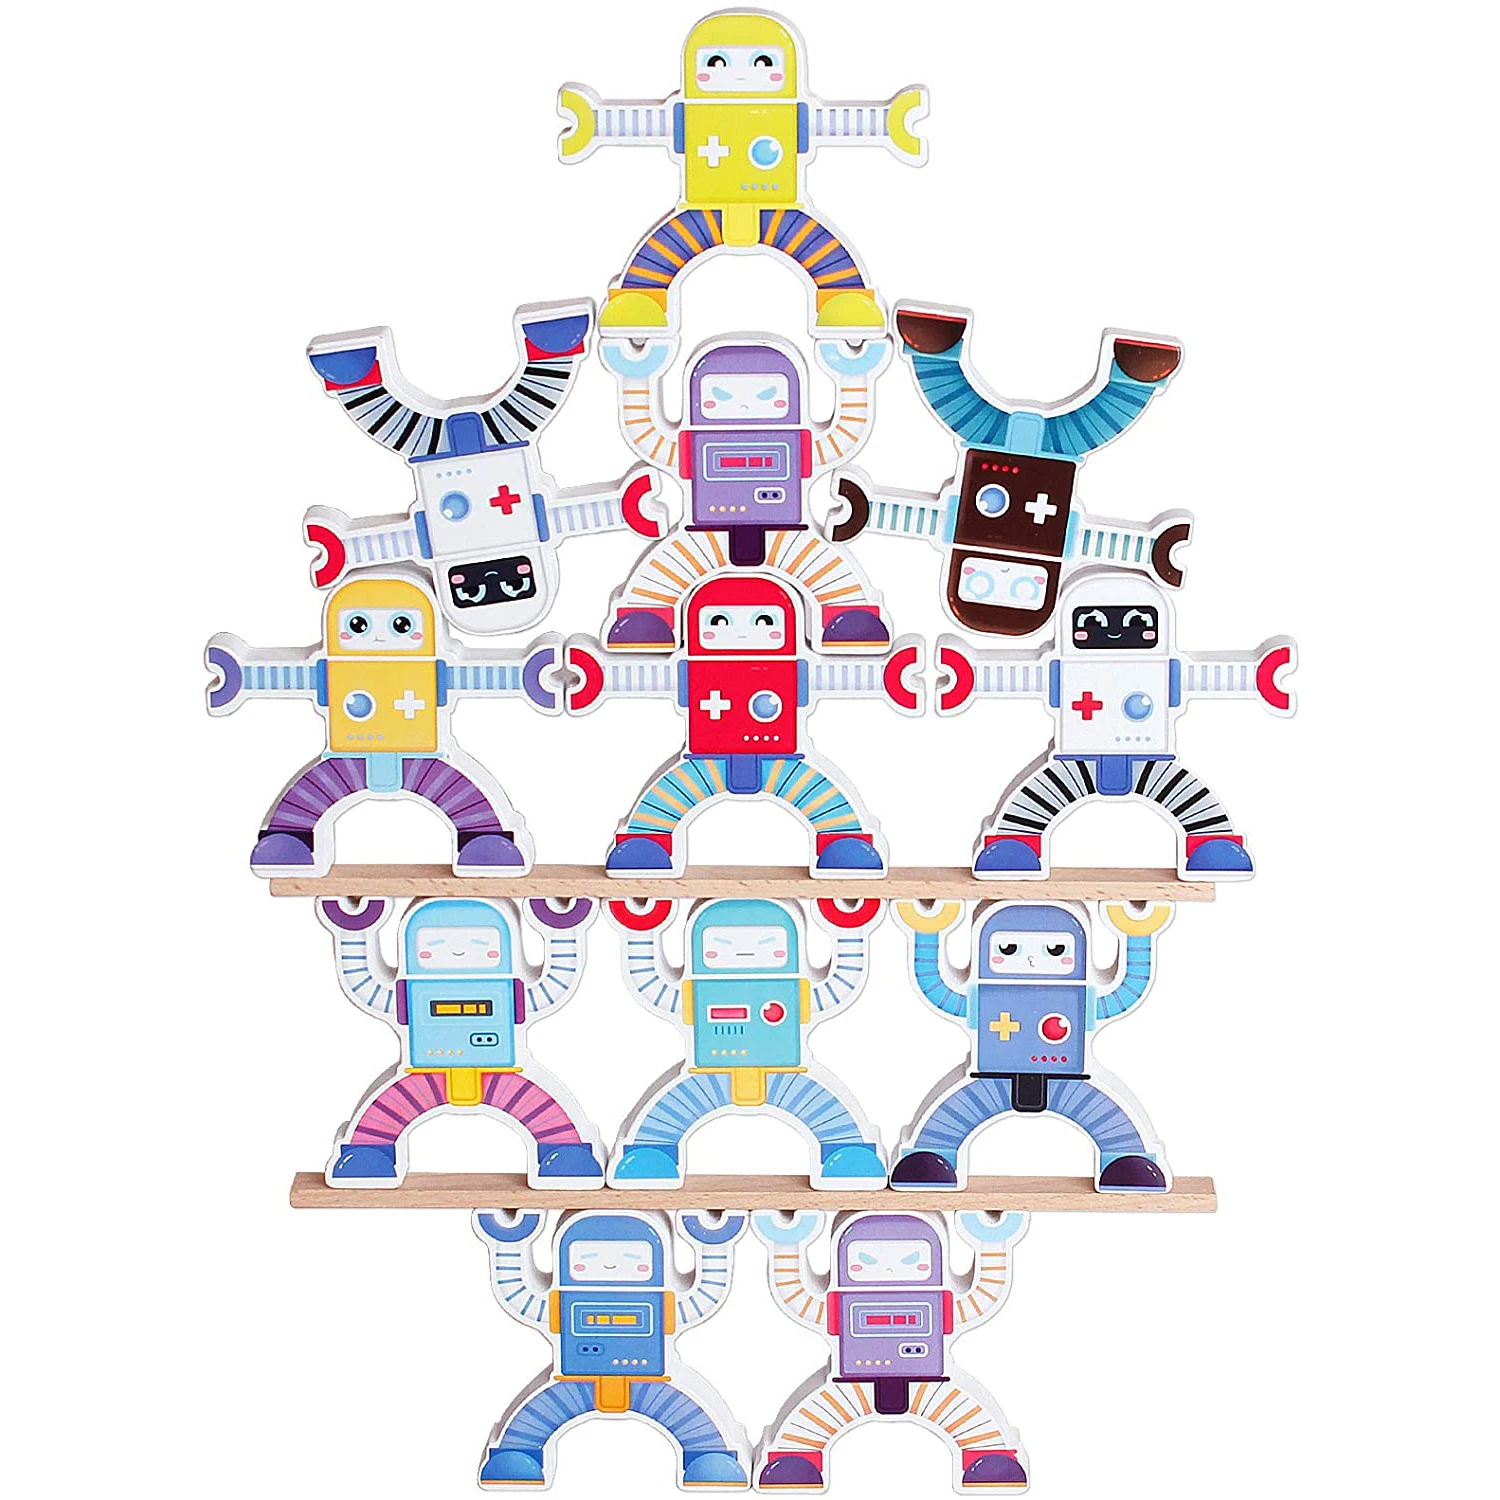 

Wooden Robots Stacking Balancing Block Puzzle Game Building Toy Educational Montessori for Kids Developing Intelligence Play Kit